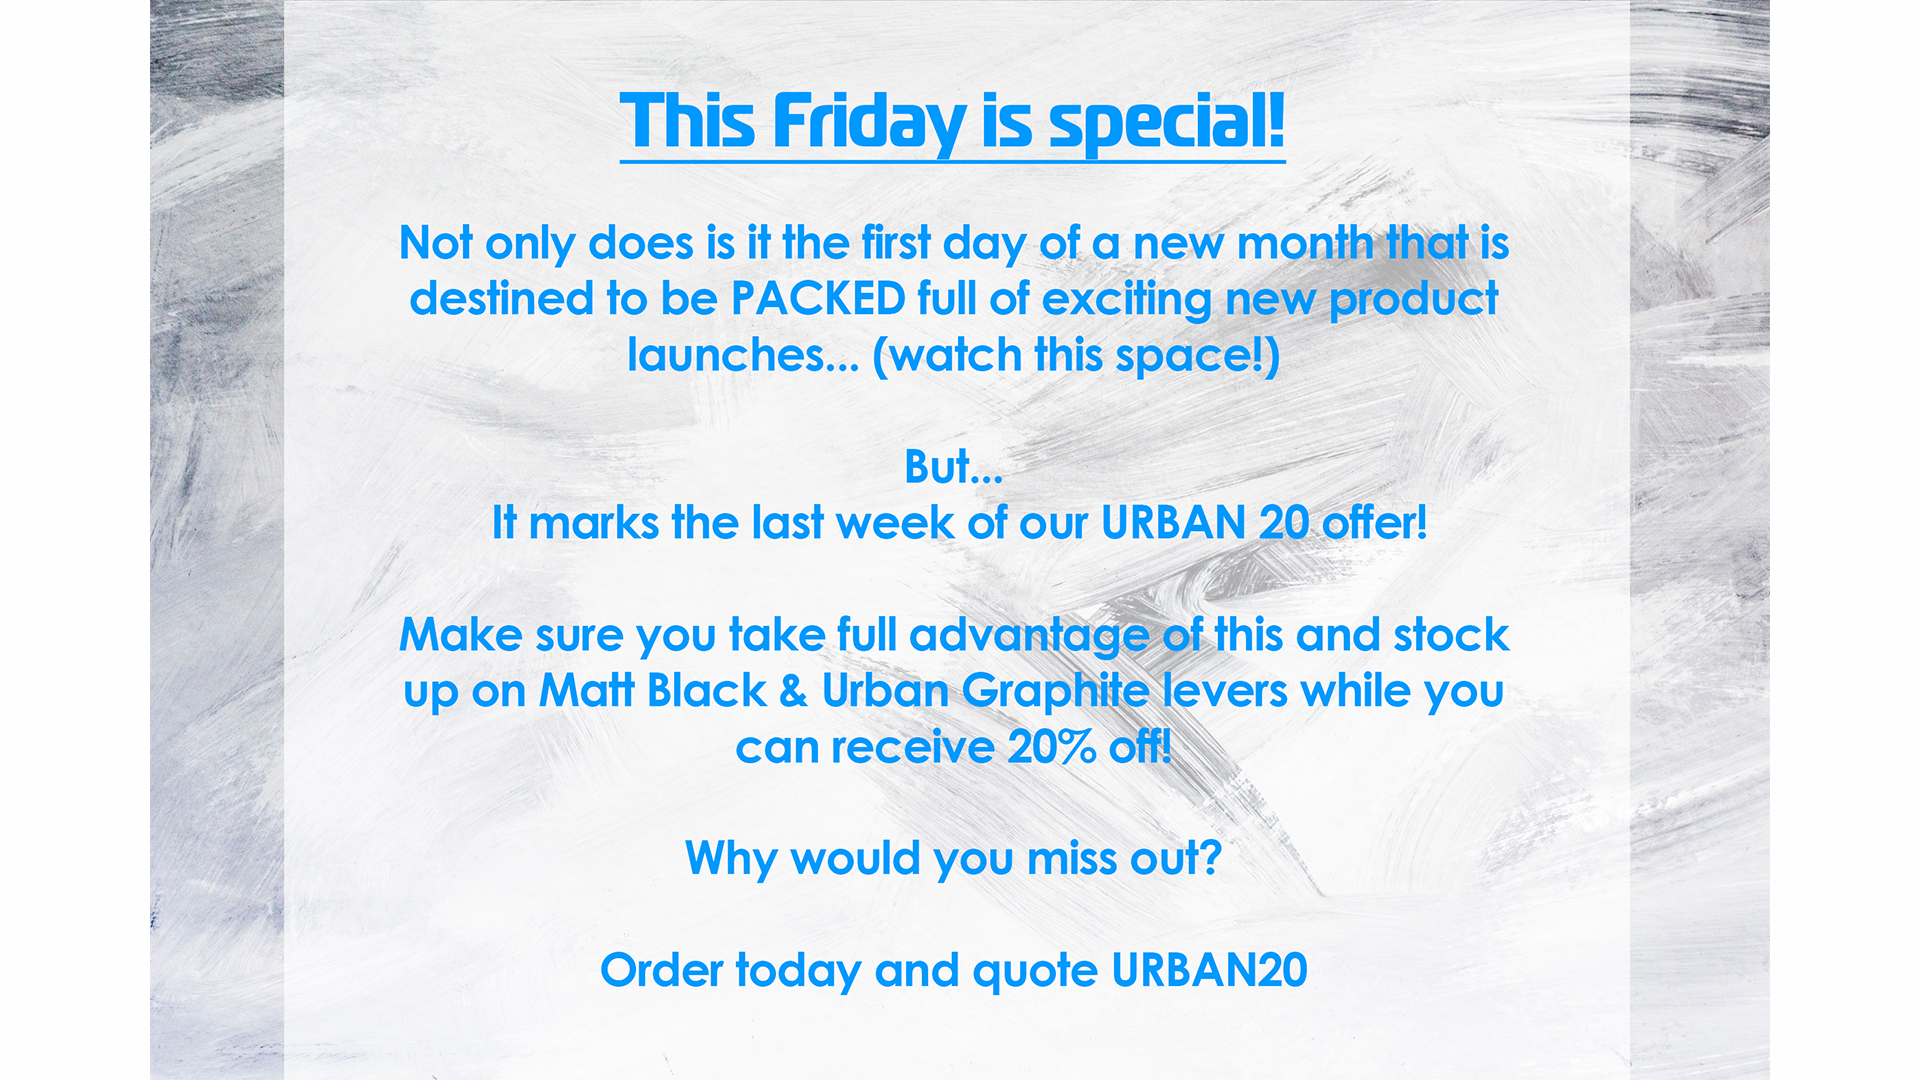 This Friday is Special! image